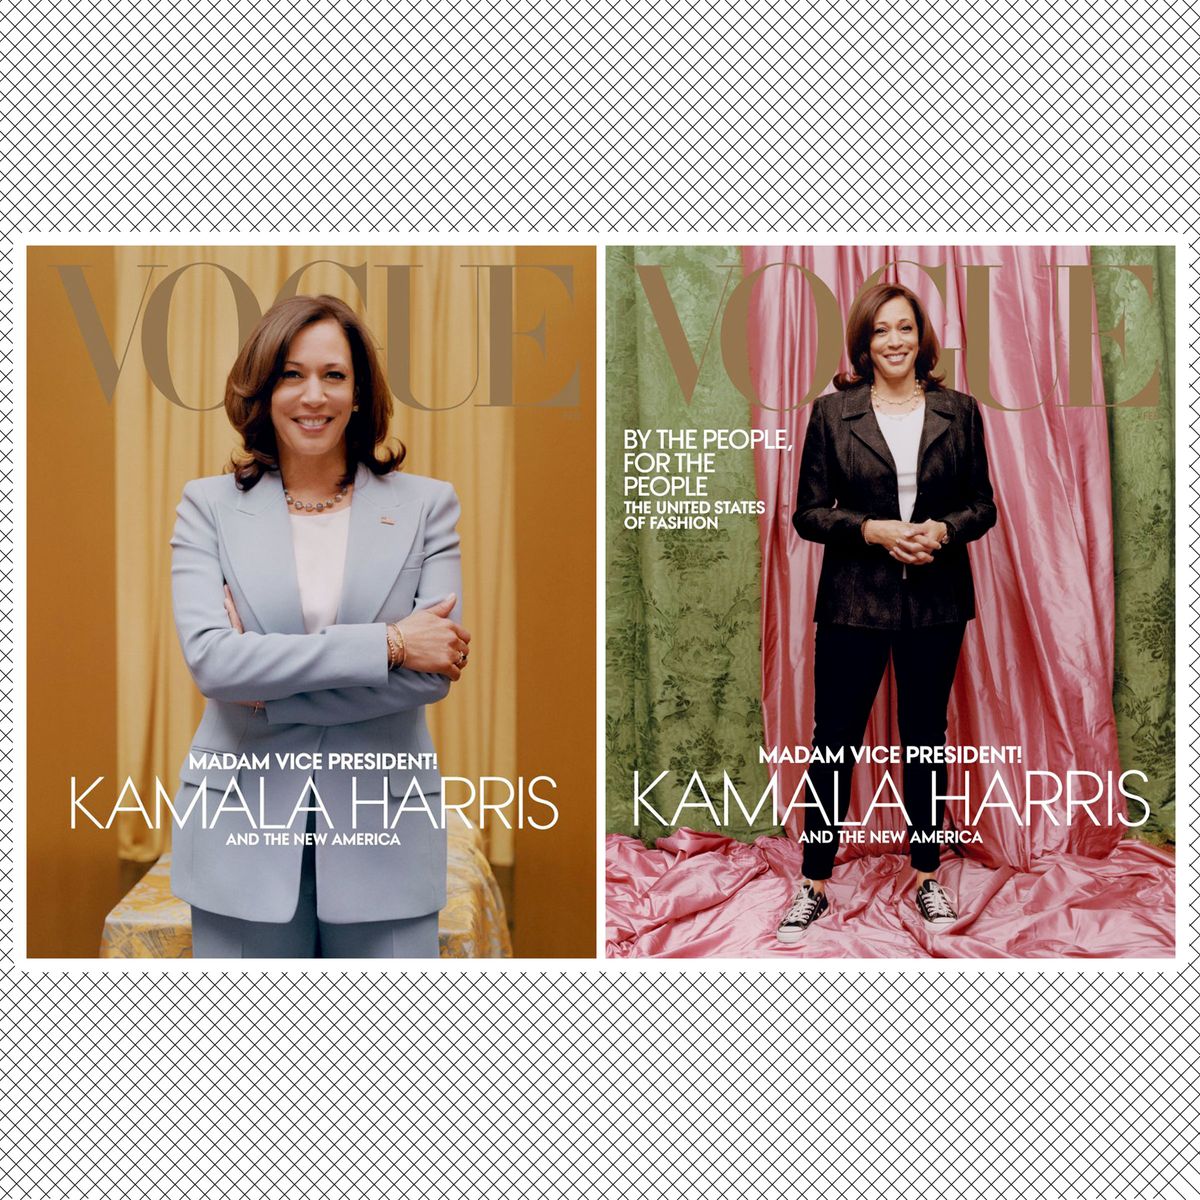 Kamala Harris S Team Allegedly Blindsided By Vogue Cover